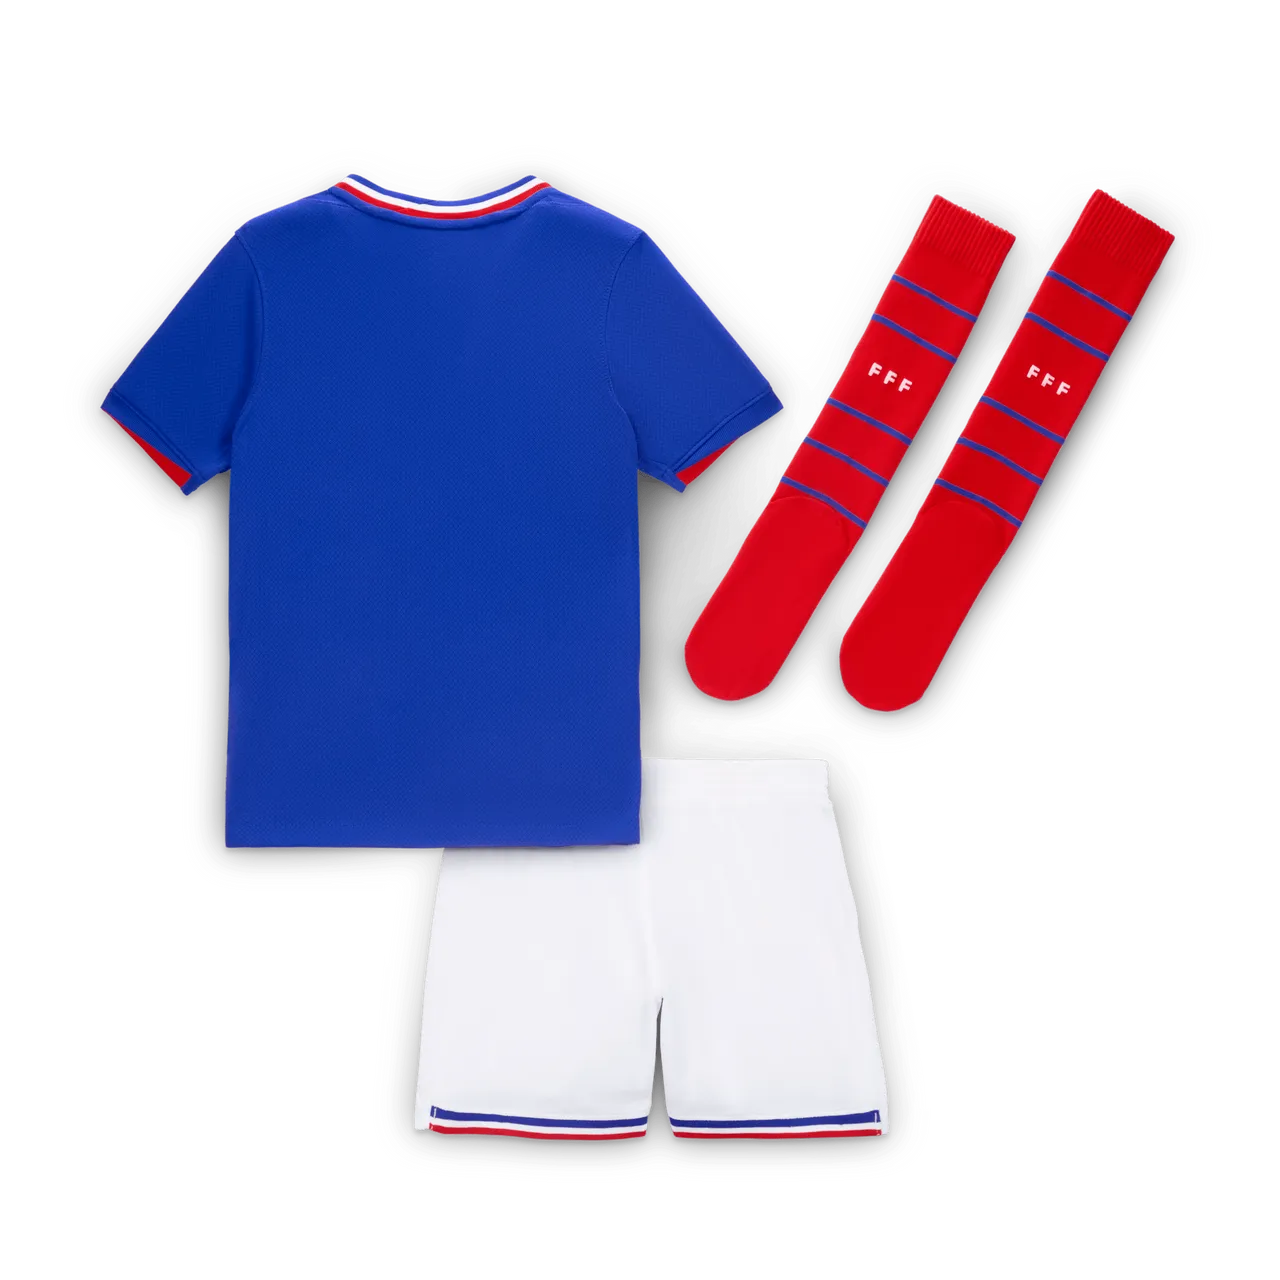 FFF 2024 Stadium Home Younger Kids' Nike Football Replica 3-Piece Kit - Blue - Polyester